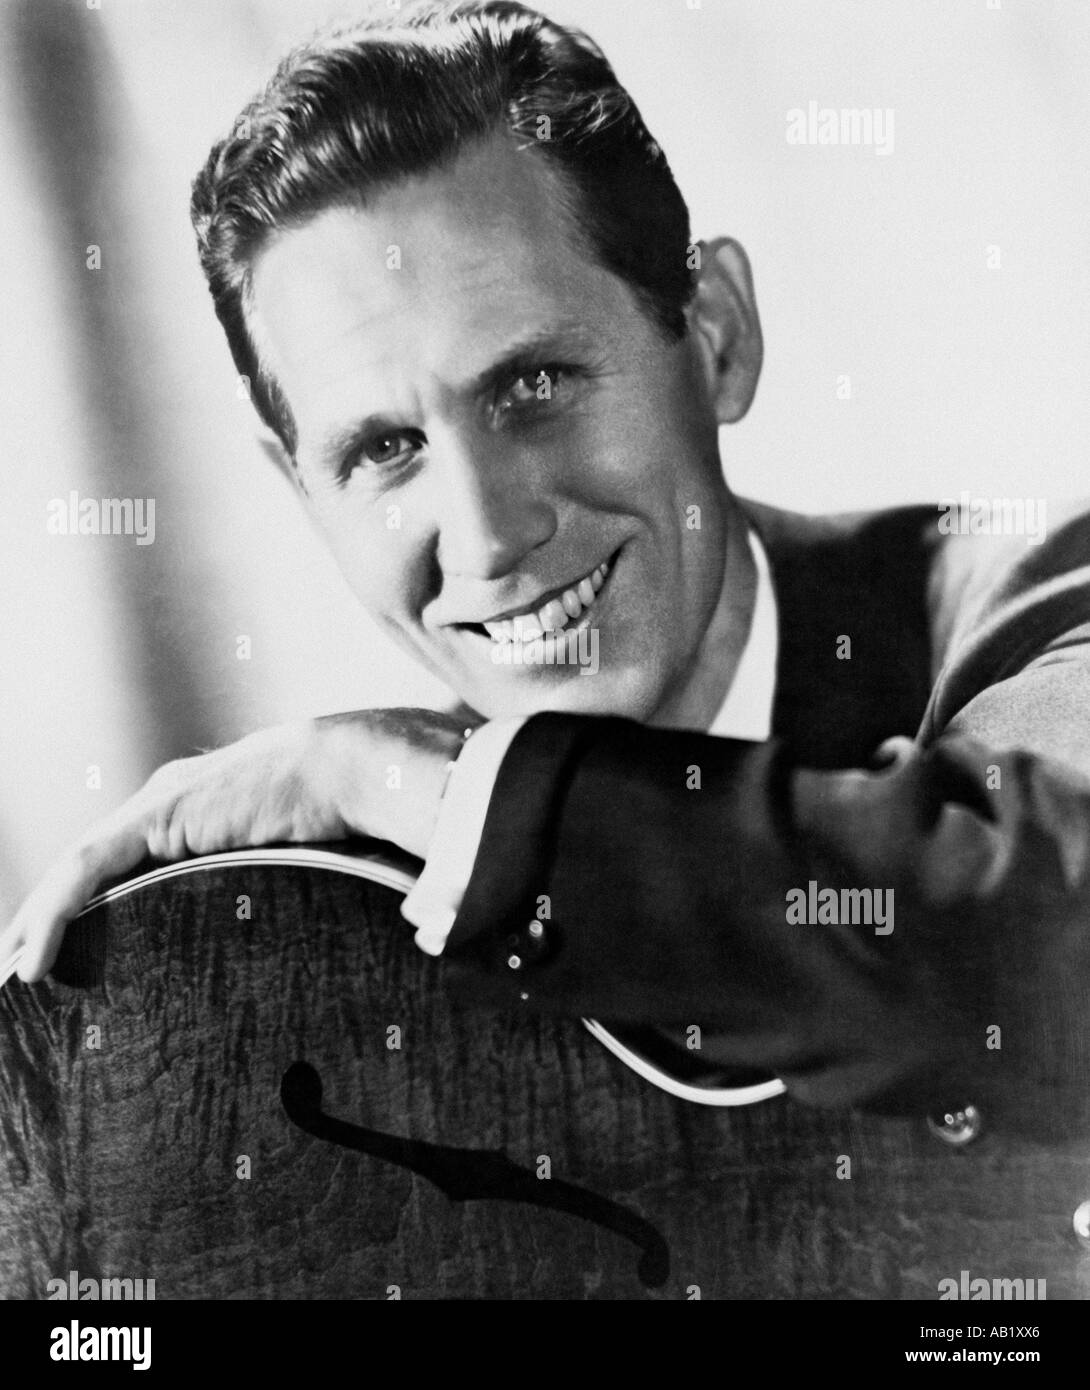 CHET ATKINS US Country musician Stock Photo